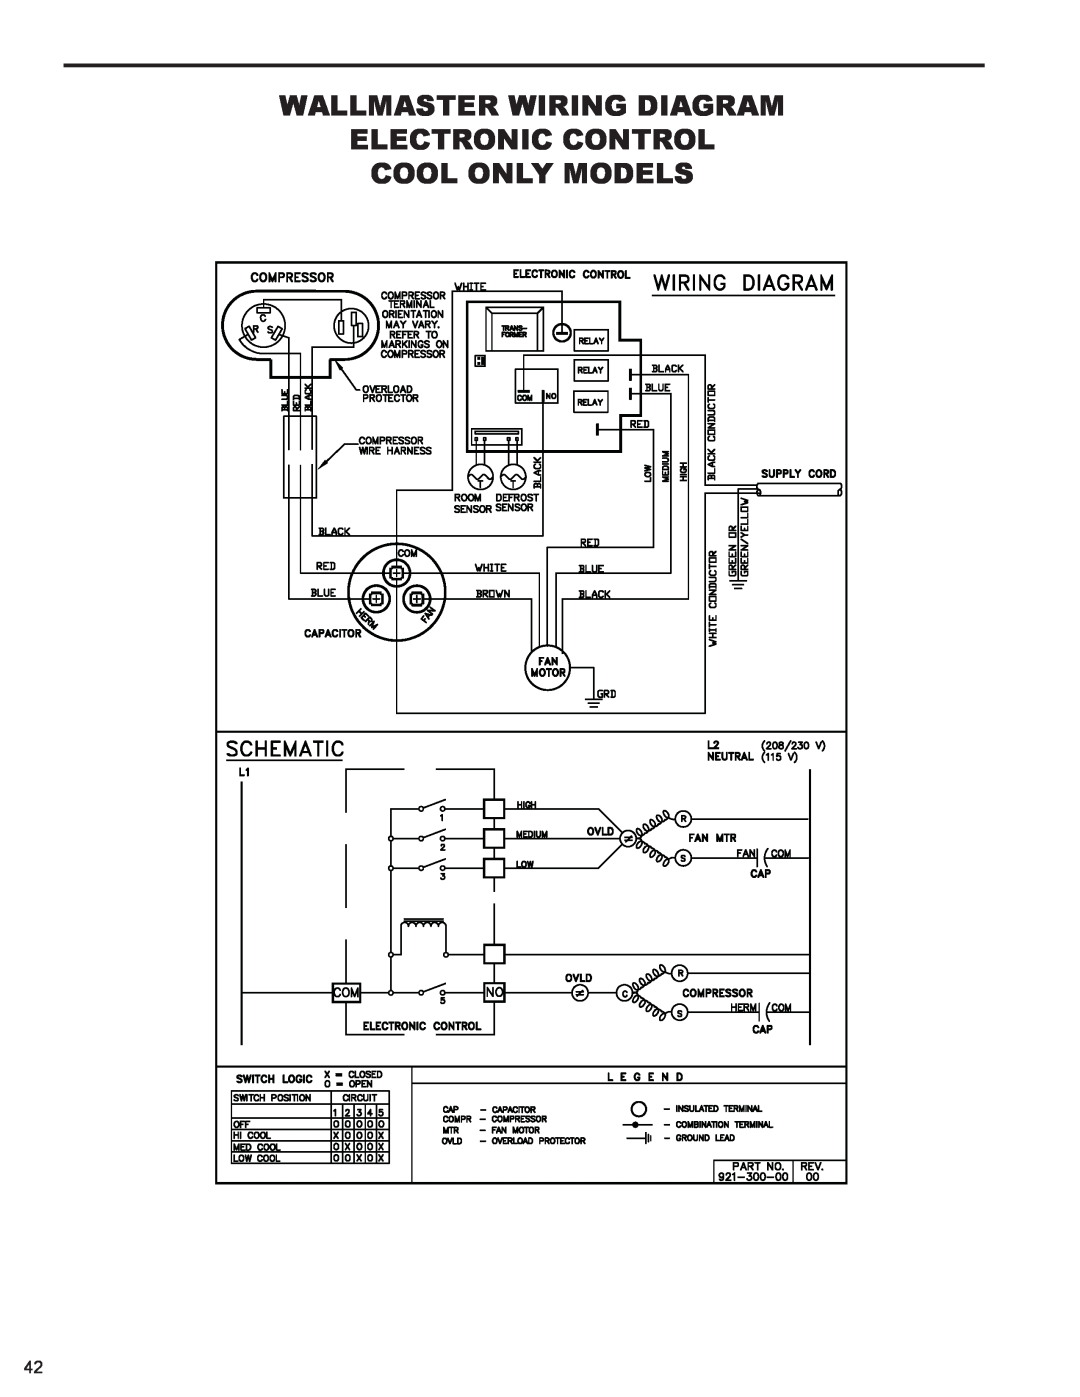 Friedrich WS10B10 service manual Wallmaster Wiring Diagram Electronic Control, Cool Only Models 